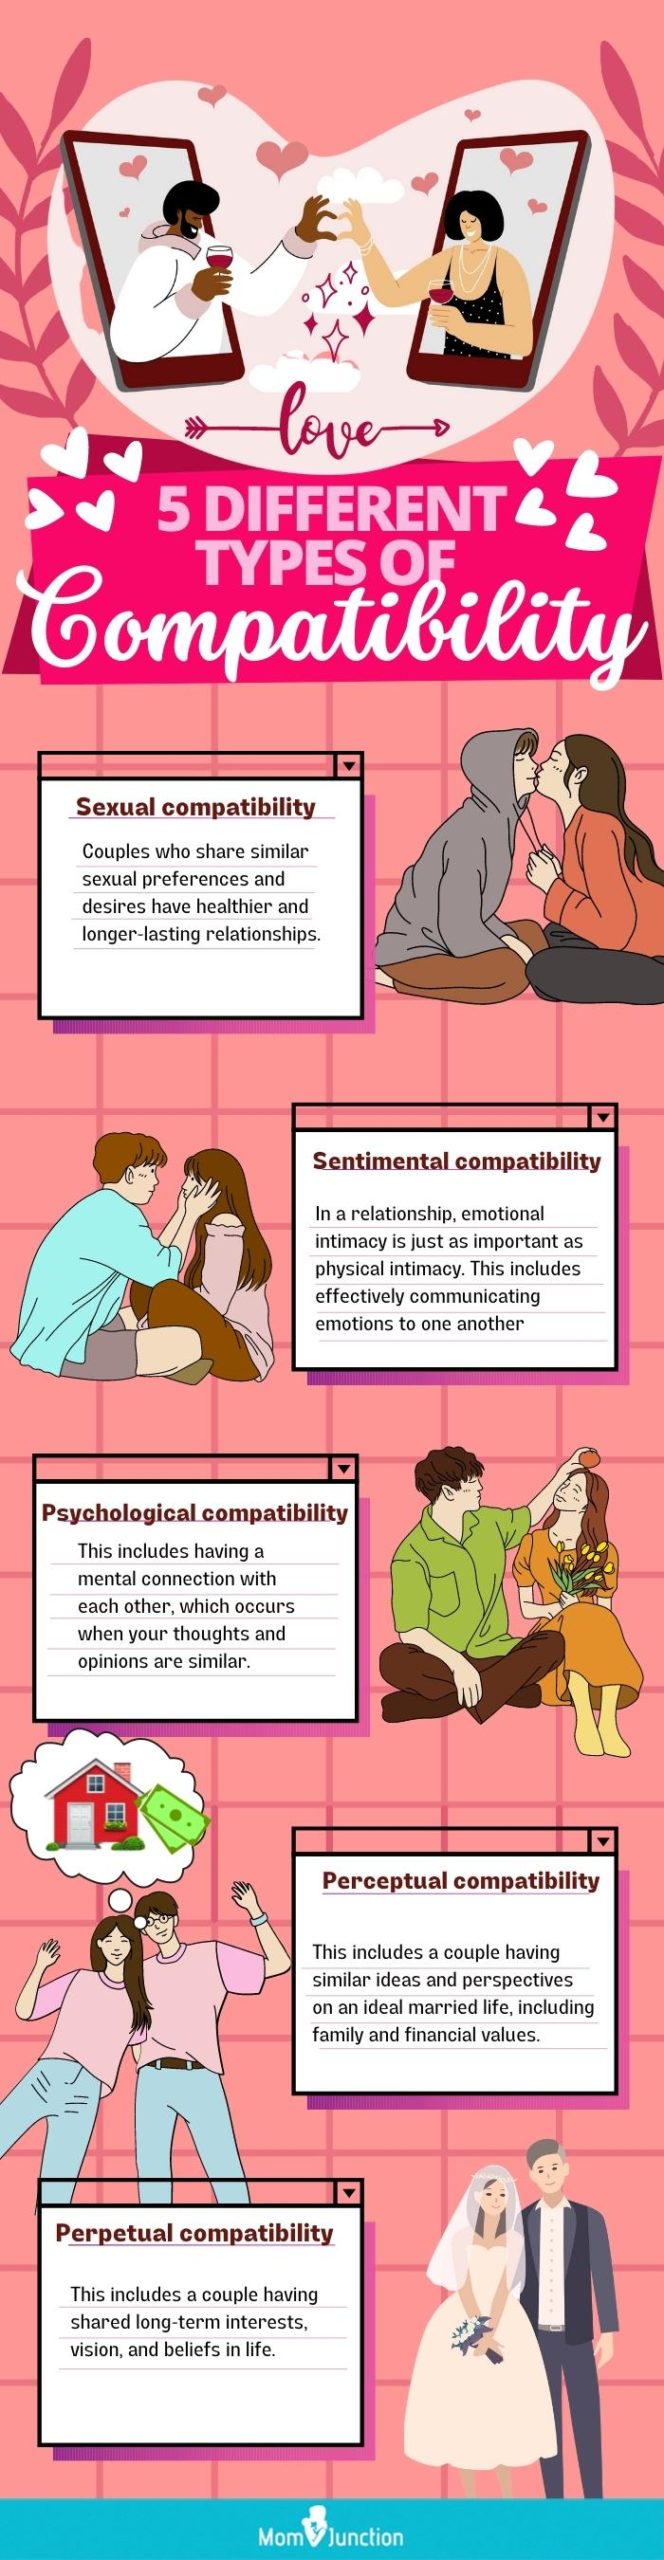 different types of compatibility [infographic]